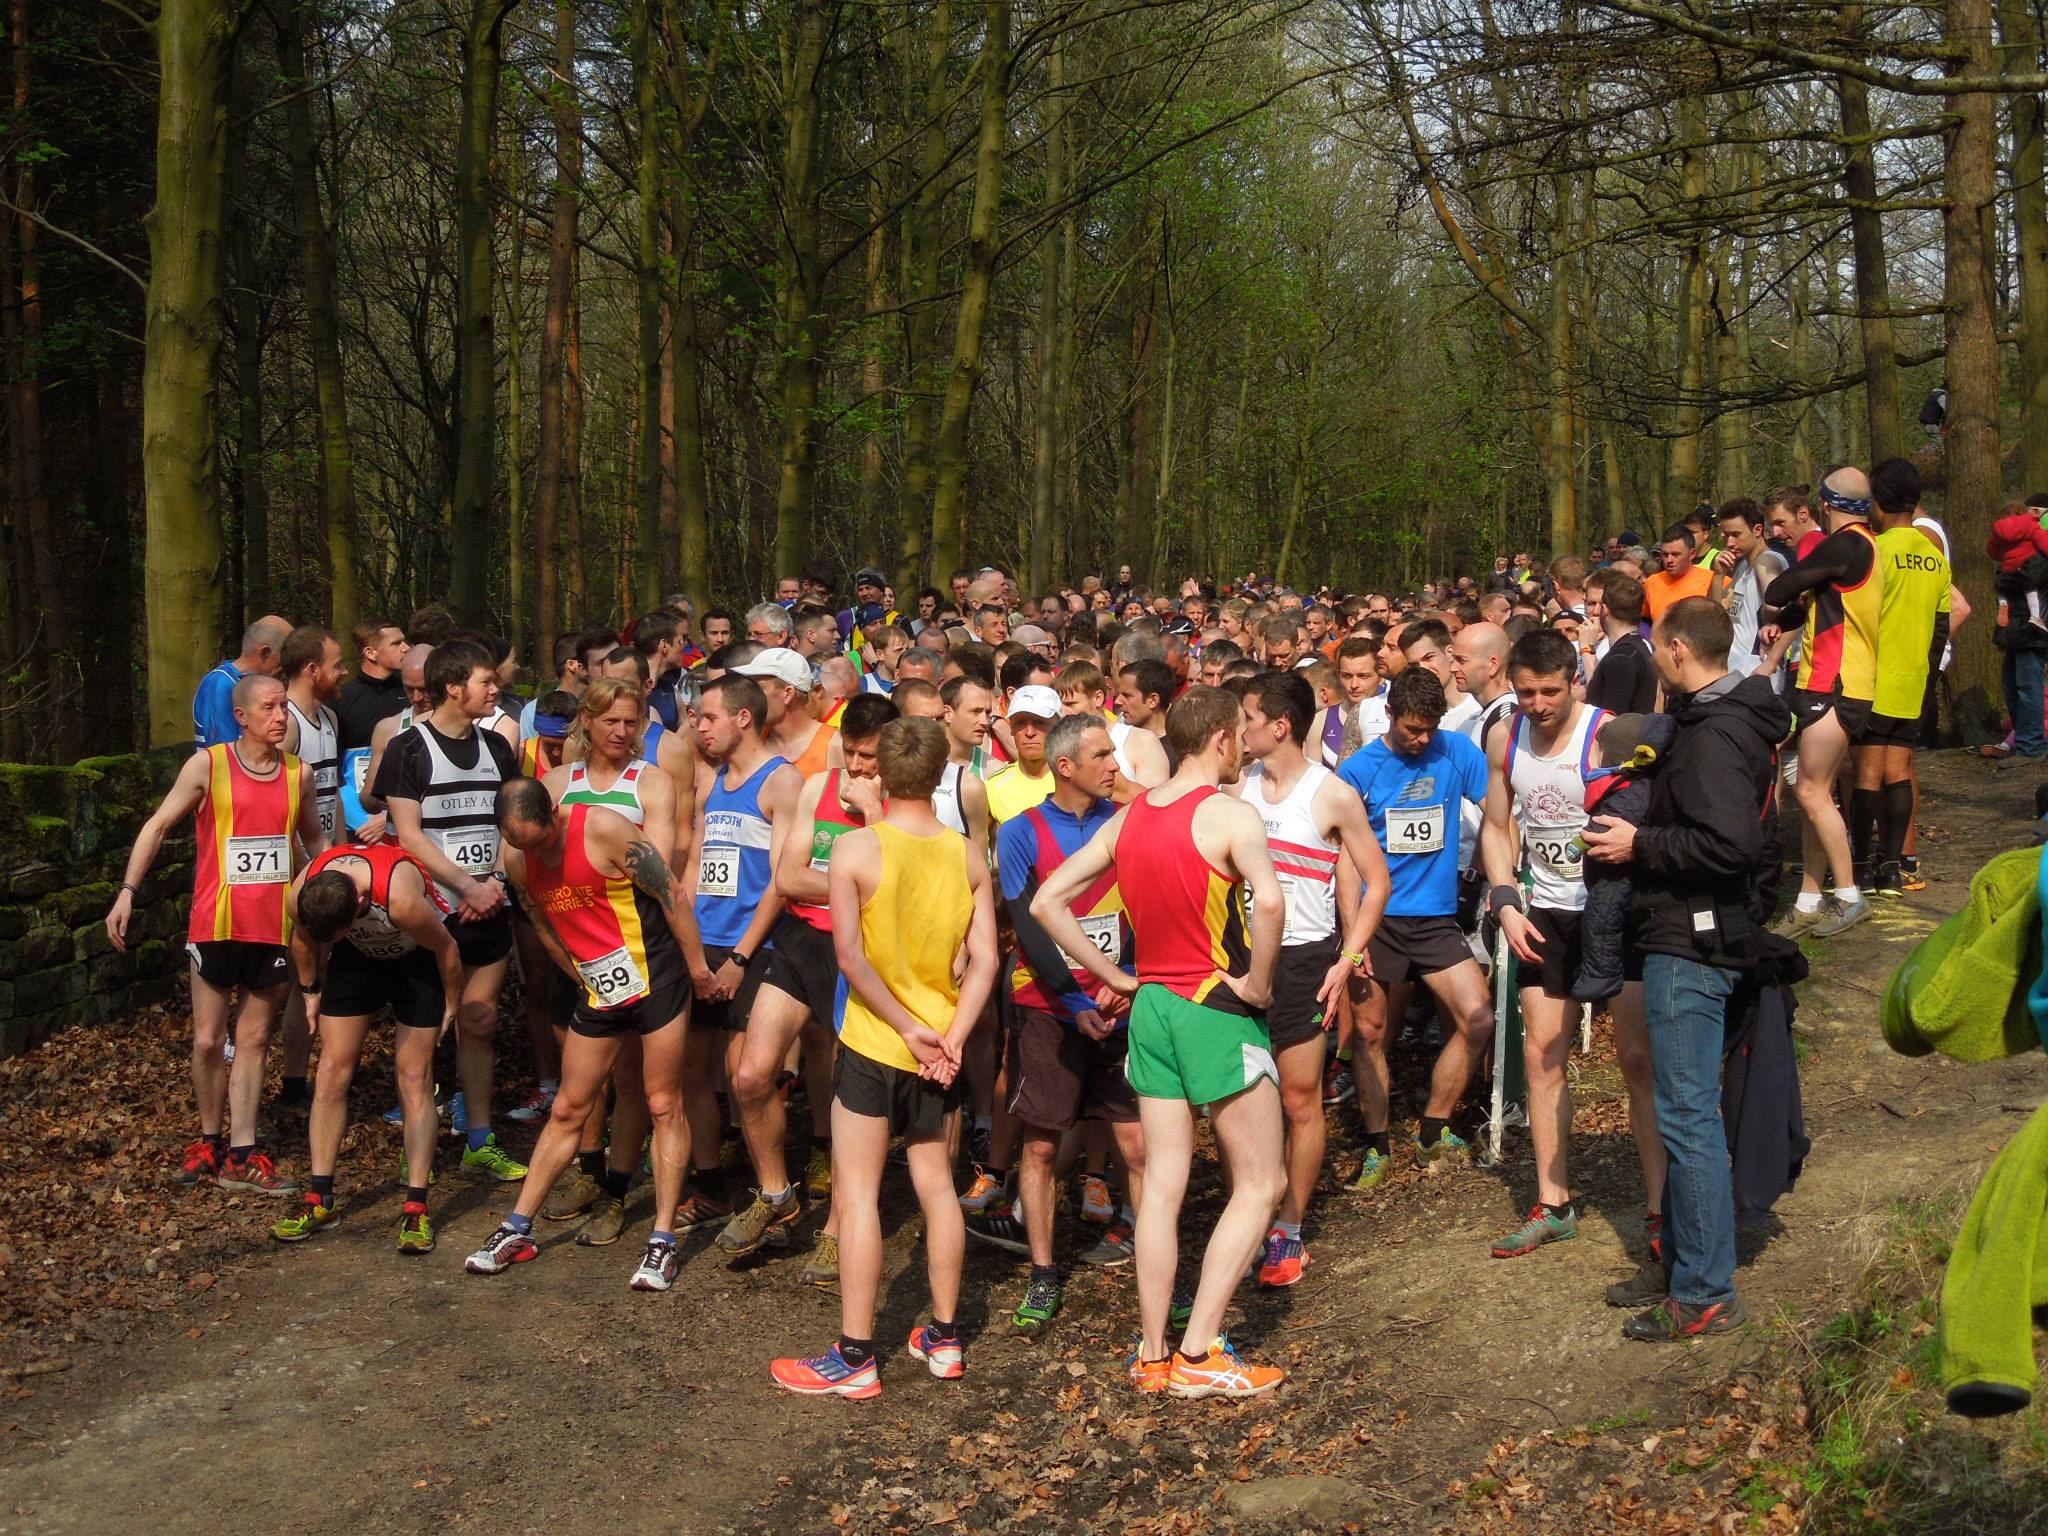 Runners gather at the start of the Gallop - Photo c/o Andy Wicks